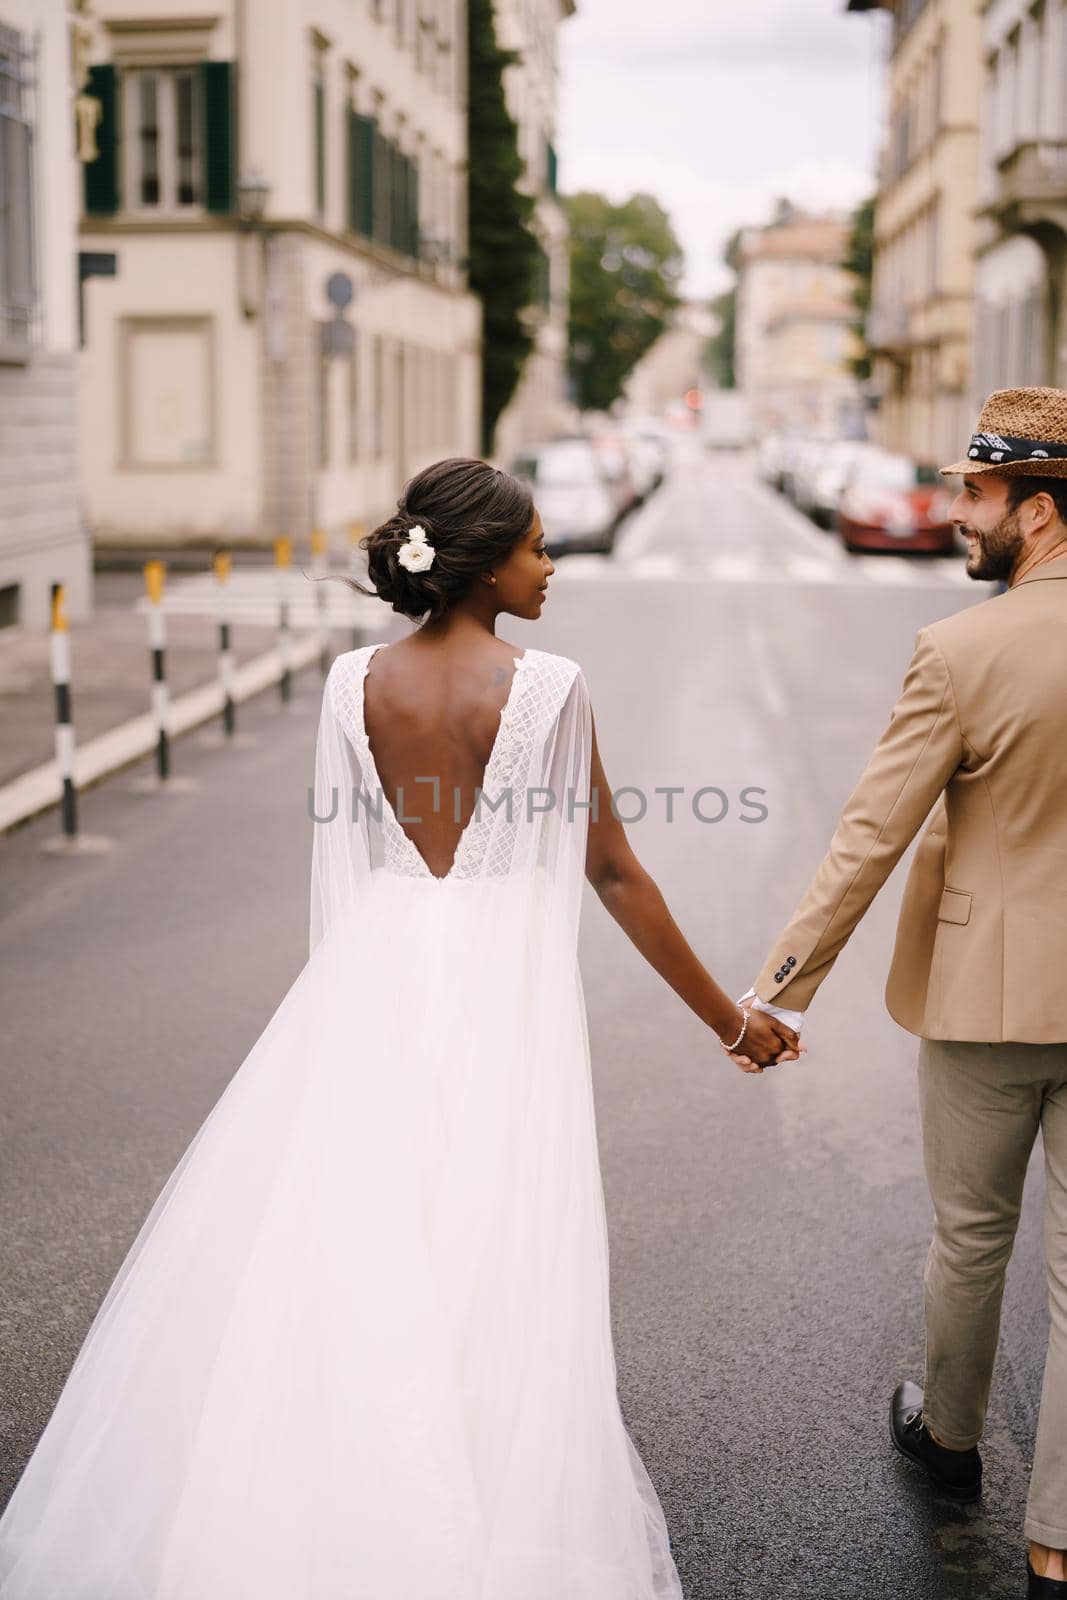 Wedding in Florence, Italy. Interracial wedding couple. African-American bride and Caucasian groom walk along the road among cars.